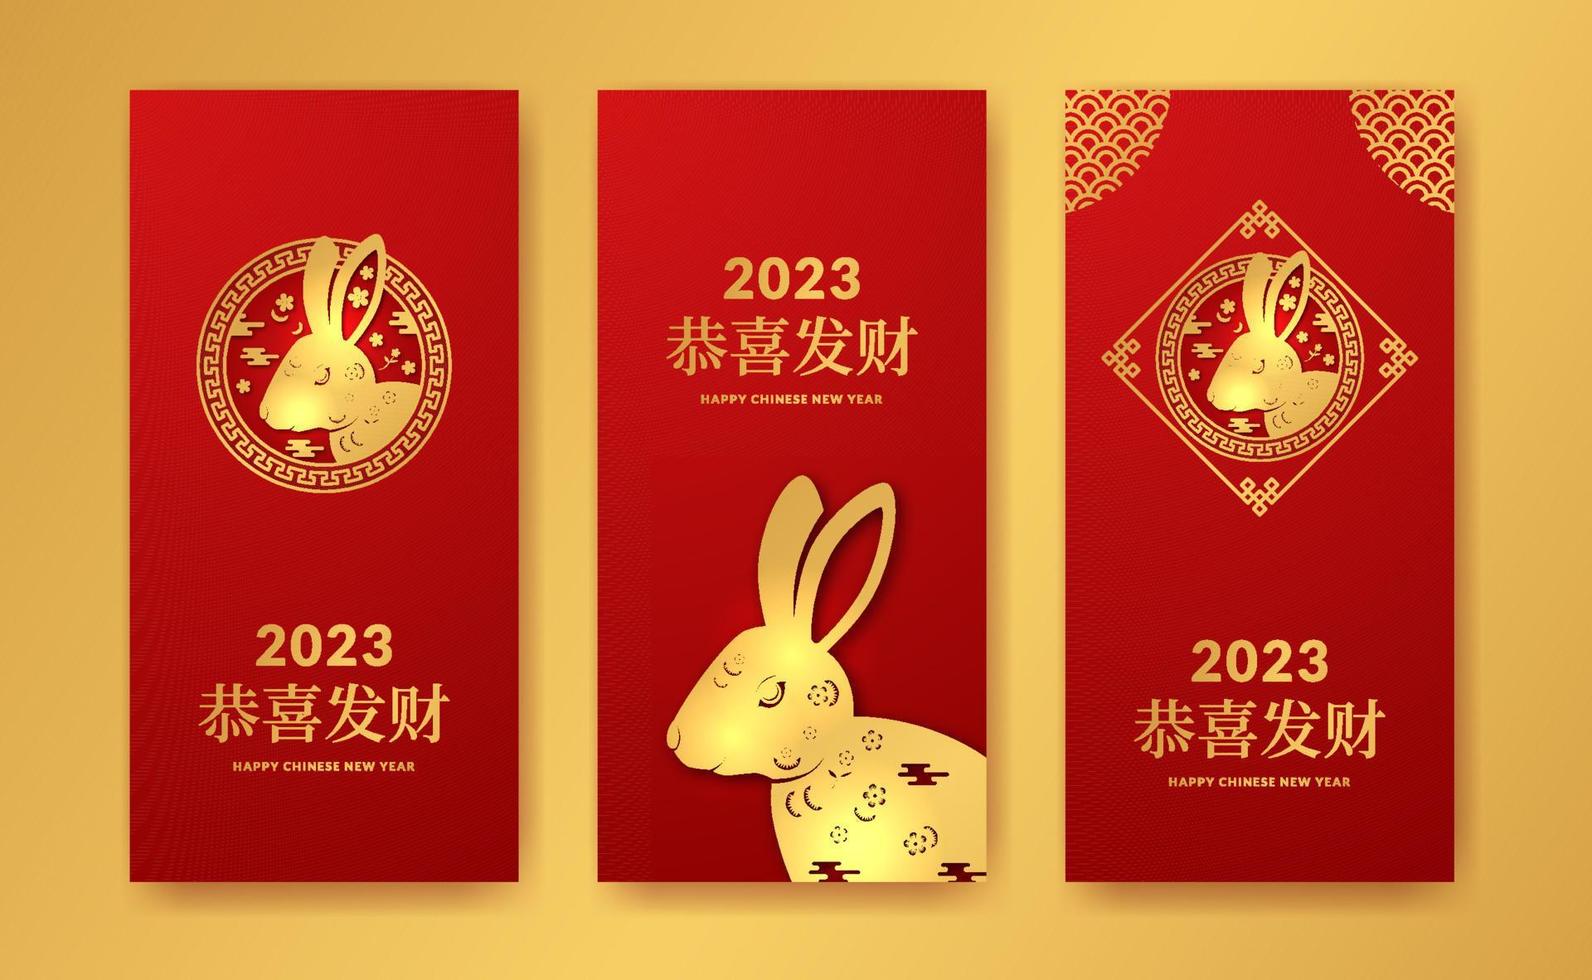 Chinese New year 2023. Year of rabbit. bunny golden decoration pattern element for social media stories vector